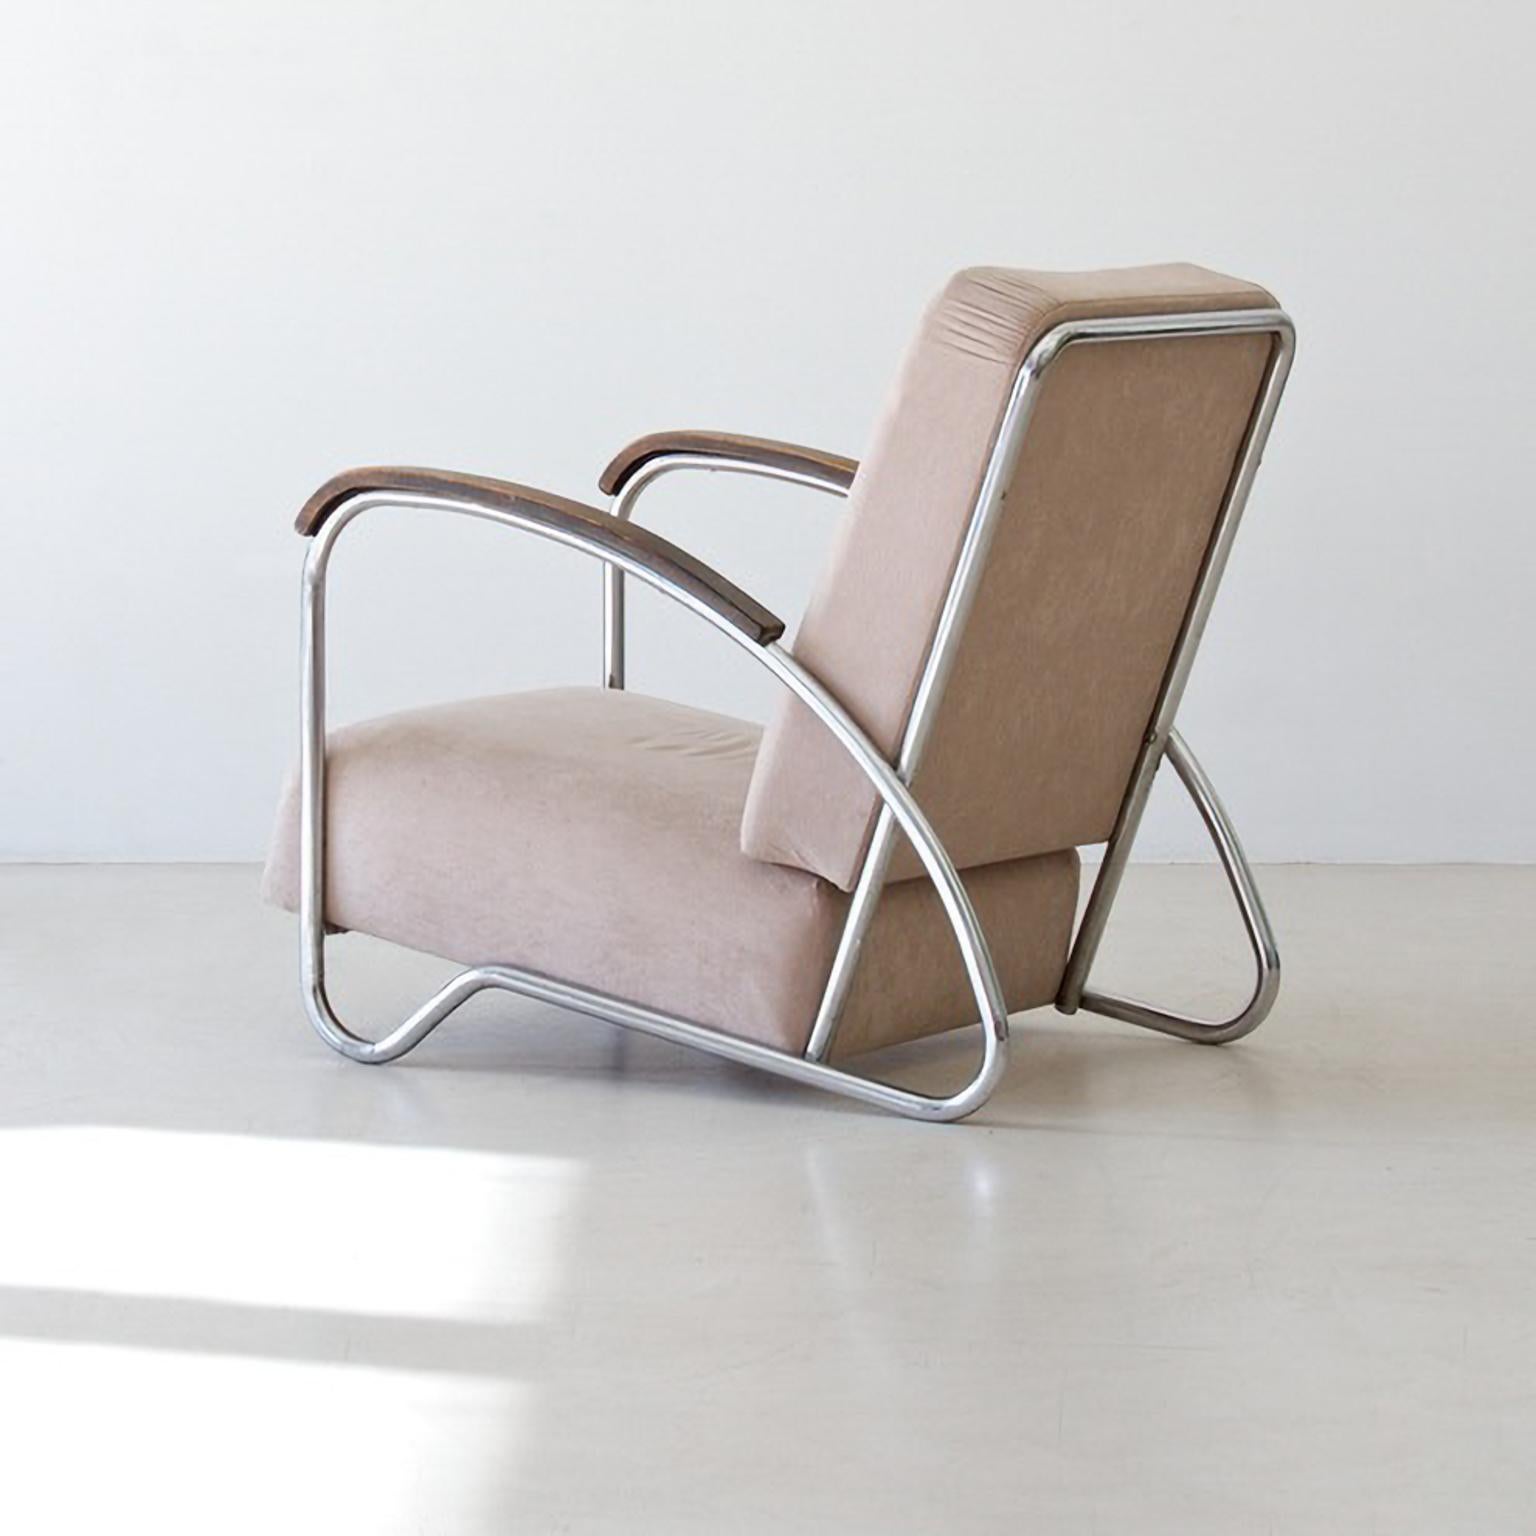 Modernist Tubular Steel Armchairs, Can Be Covered In Fabric Or Leather, c 1930 In Good Condition For Sale In Berlin, DE